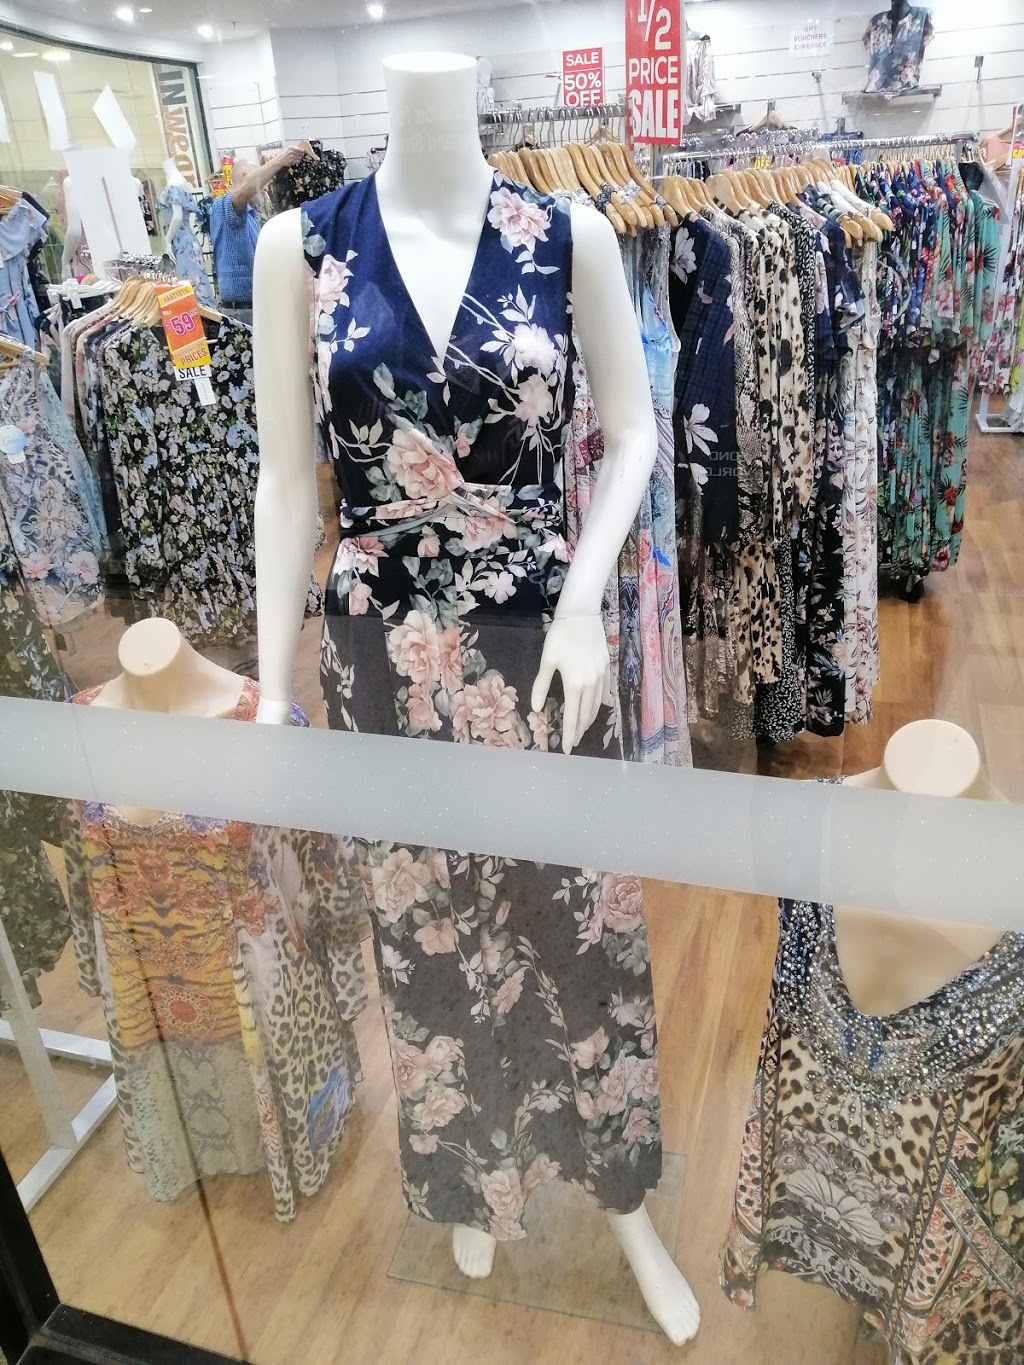 INwear Fashions | clothing store | Shop 41, Level 3 (Just Past Suncorp) Sunnybank Hills Shopping Town, Corner Calam and Compton Rds, Sunnybank Hills QLD 4109, Australia | 0406187056 OR +61 406 187 056